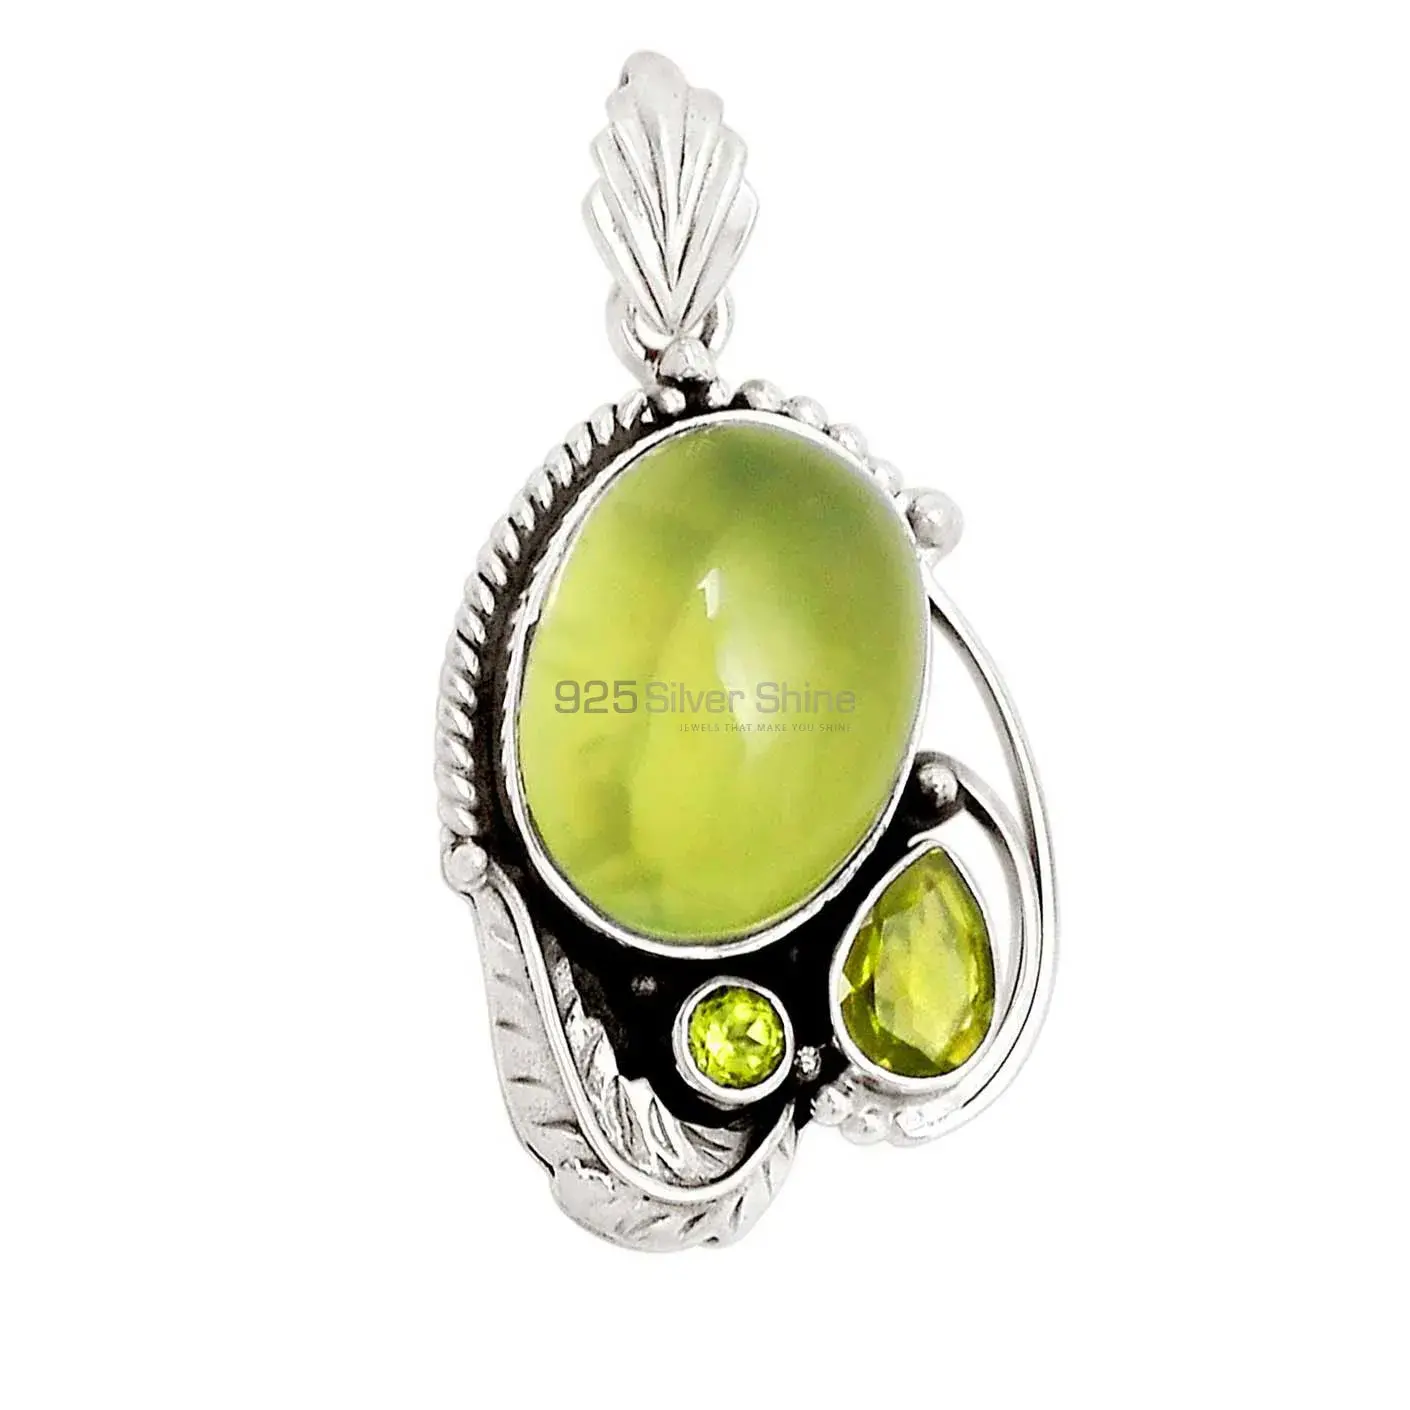 High Quality Solid Sterling Silver Handmade Pendants In Multi Gemstone Jewelry 925SP113-2_0